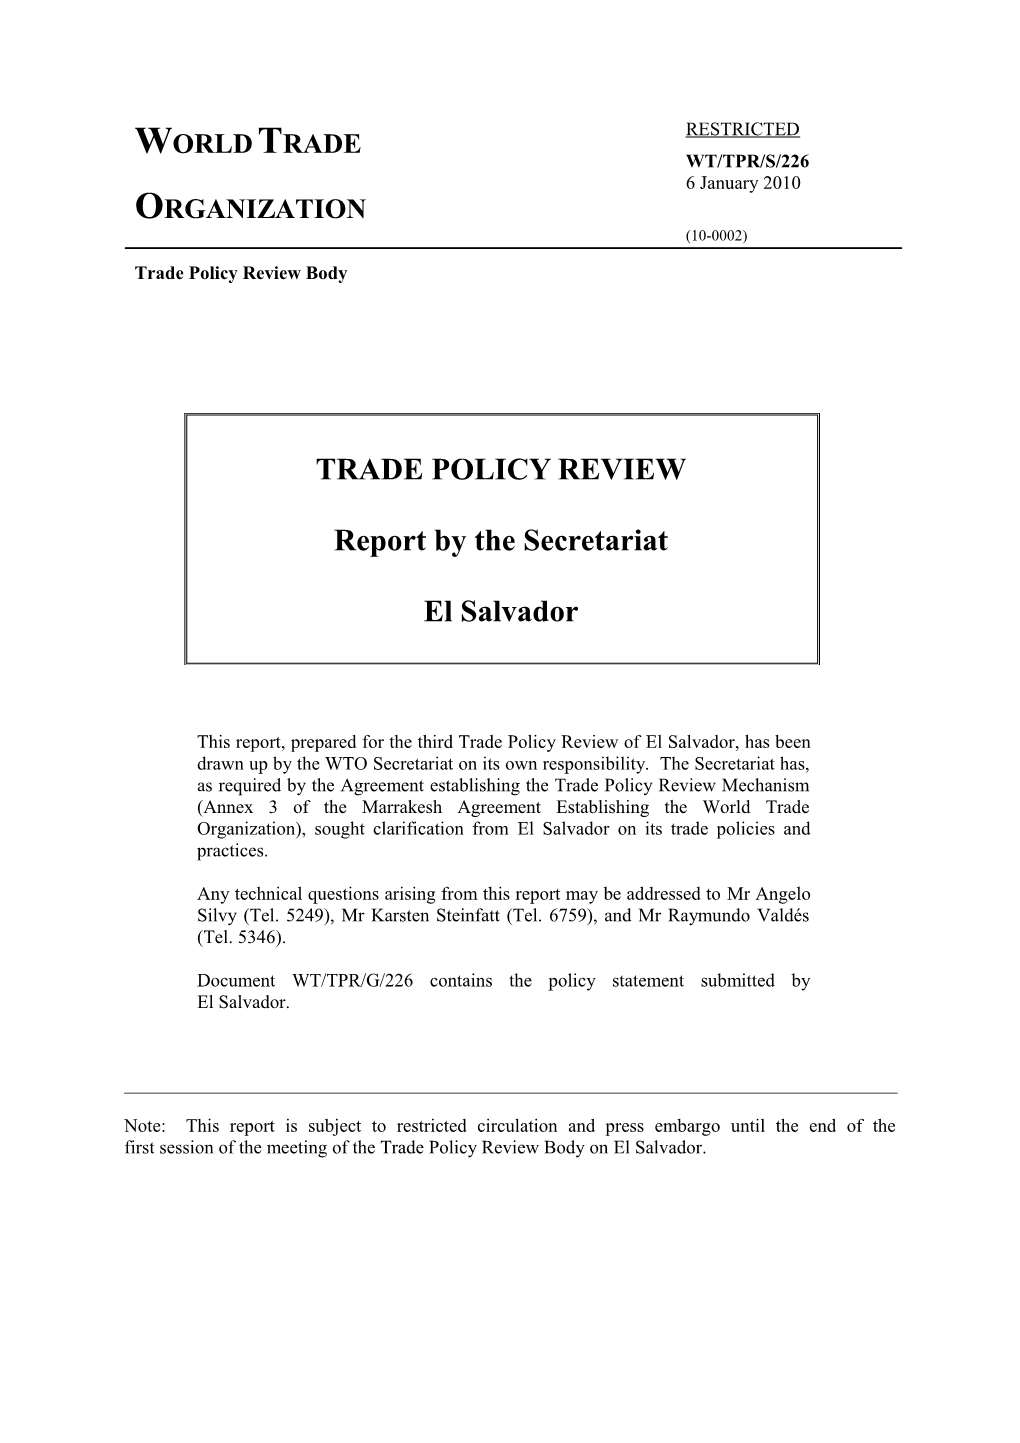 (2) Trade and Investment Policy Framework Vii s2